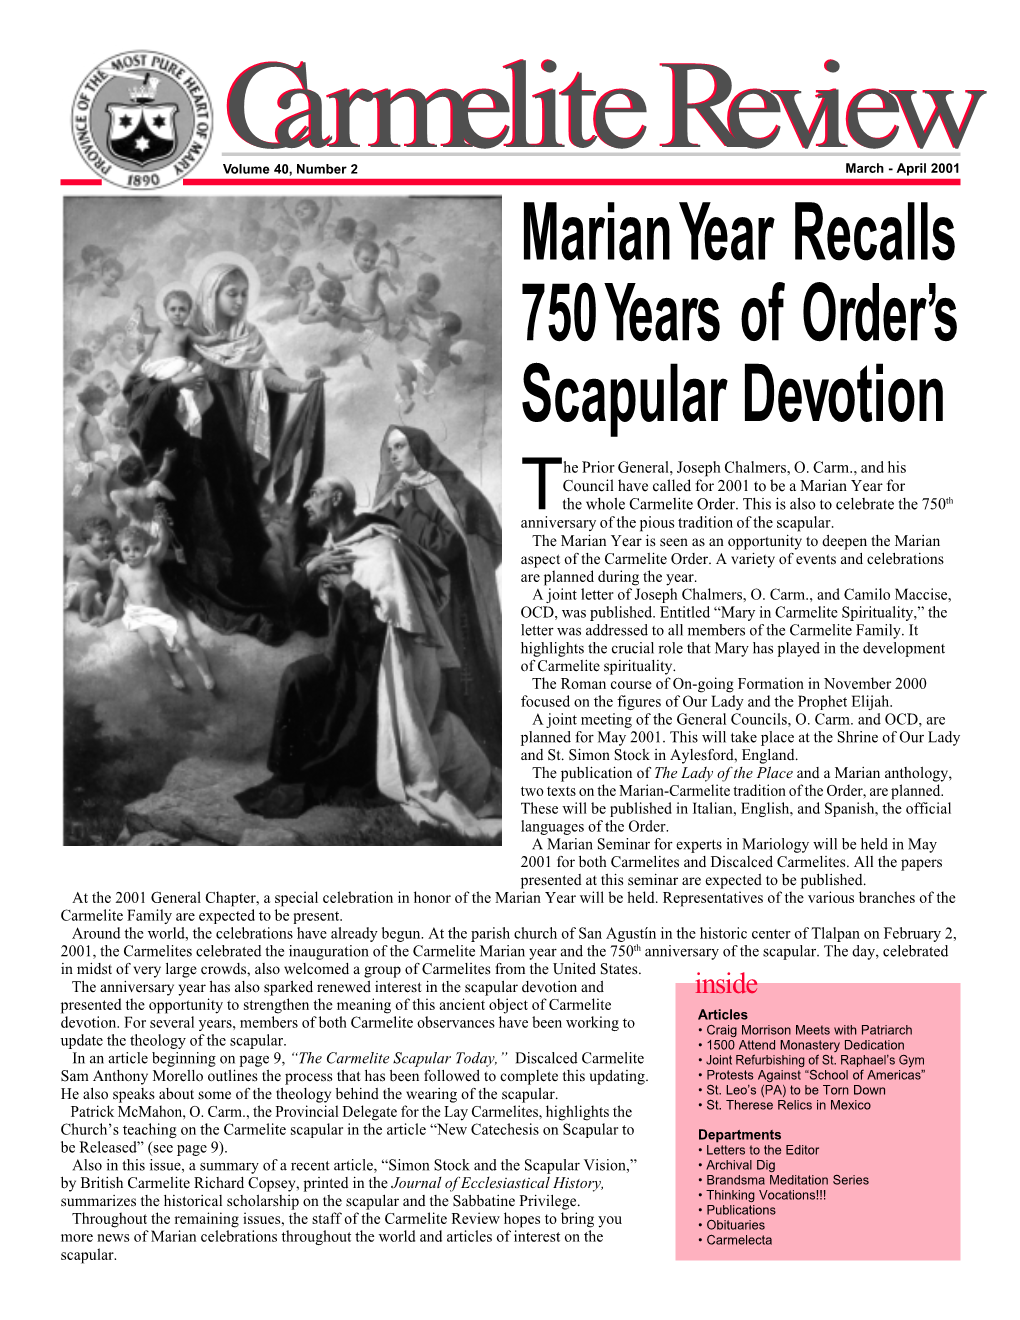 Marian Year Recalls 750 Years of Order's Scapular Devotion